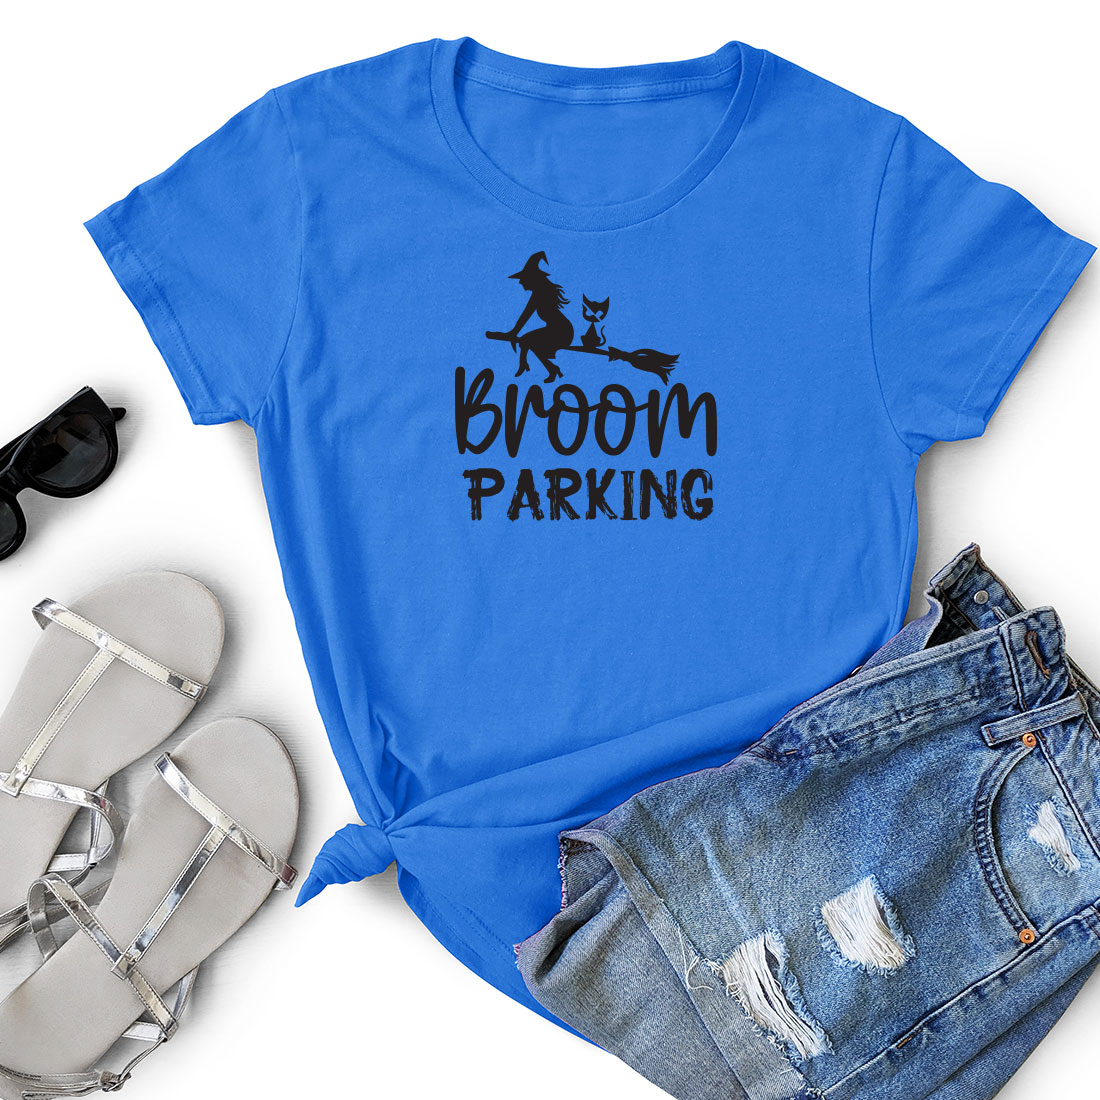 T - shirt that says broom parking next to a pair of shorts.